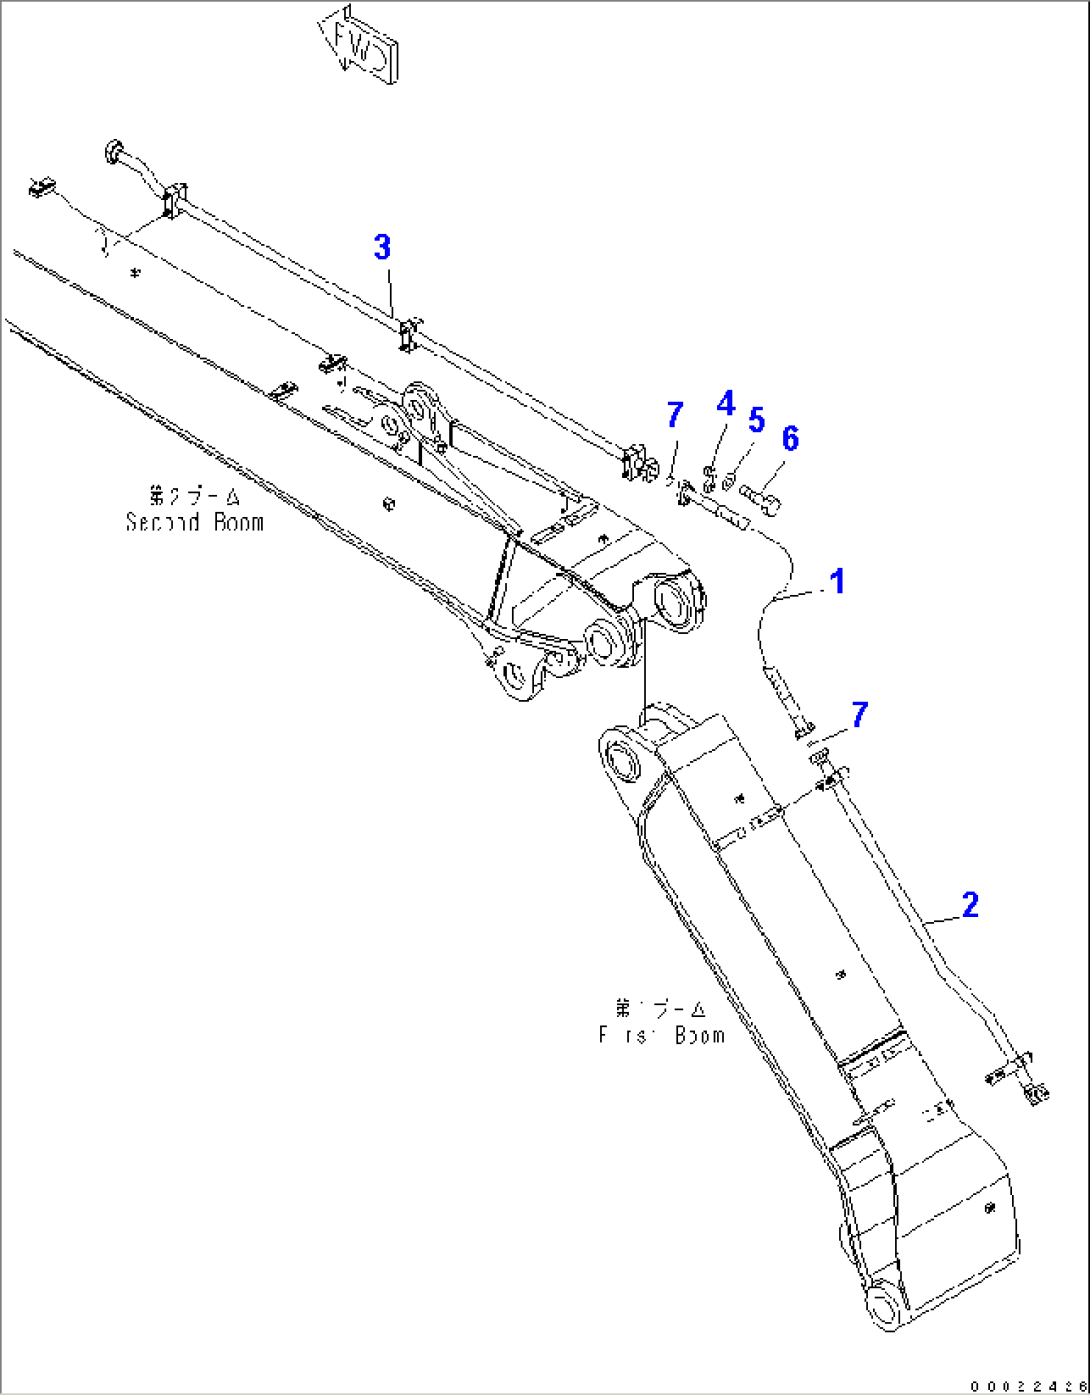 2-PIECE BOOM (ADDITIONAL PIPING) (BREAKER LINE) (PIPING)